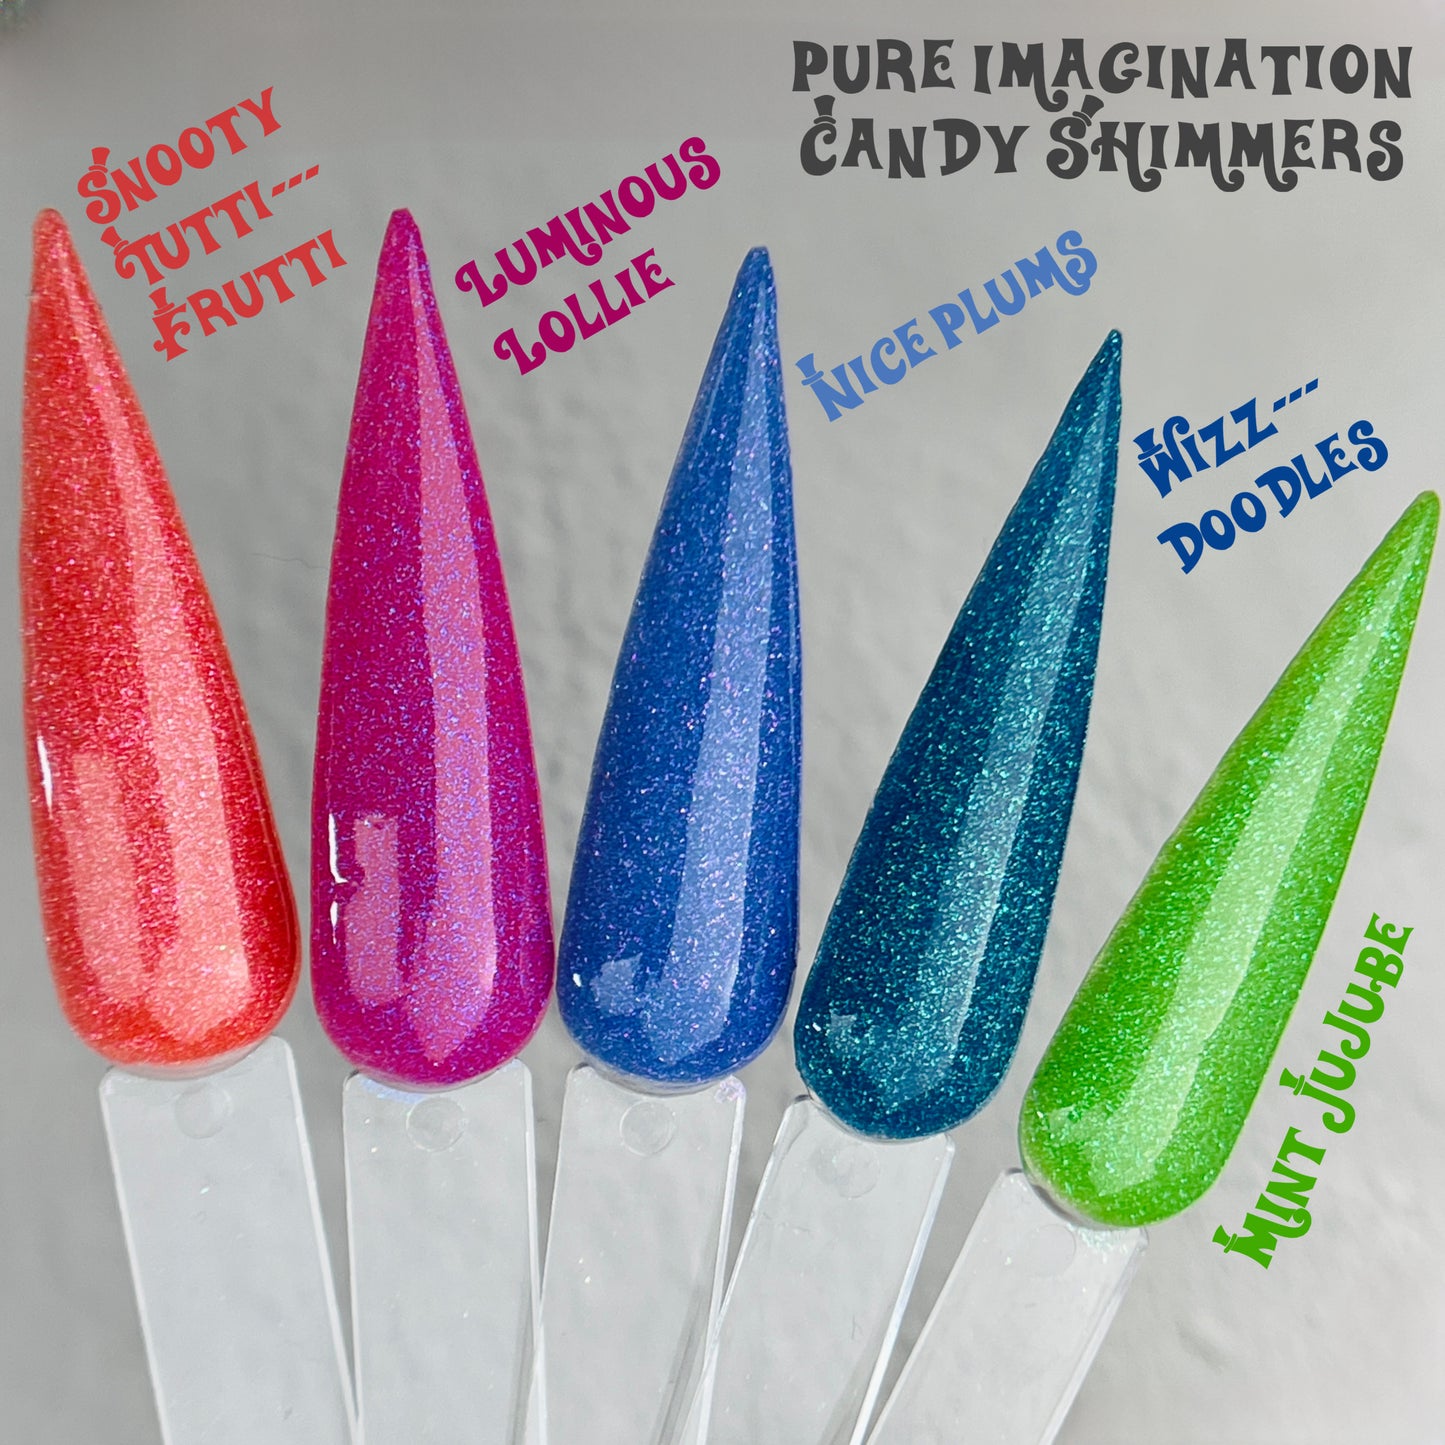 Pure Imagination Candy Shimmers Set